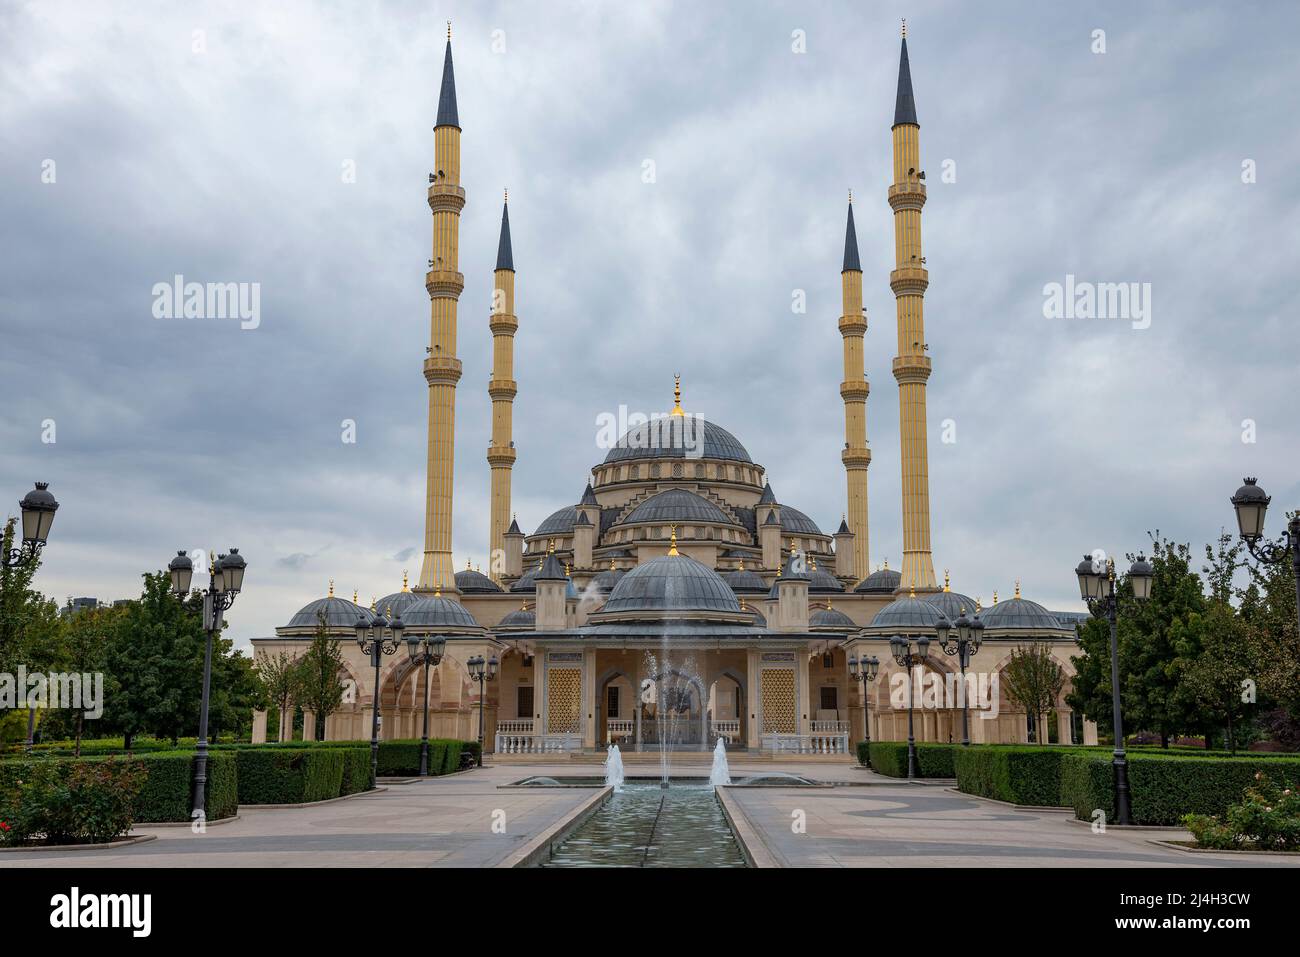 GROZNY, RUSSIA - SEPTEMBER 29, 2021: The Heart of Chechnya Mosque under the evening cloudy sky. Grozny, Chechen Republic Stock Photo